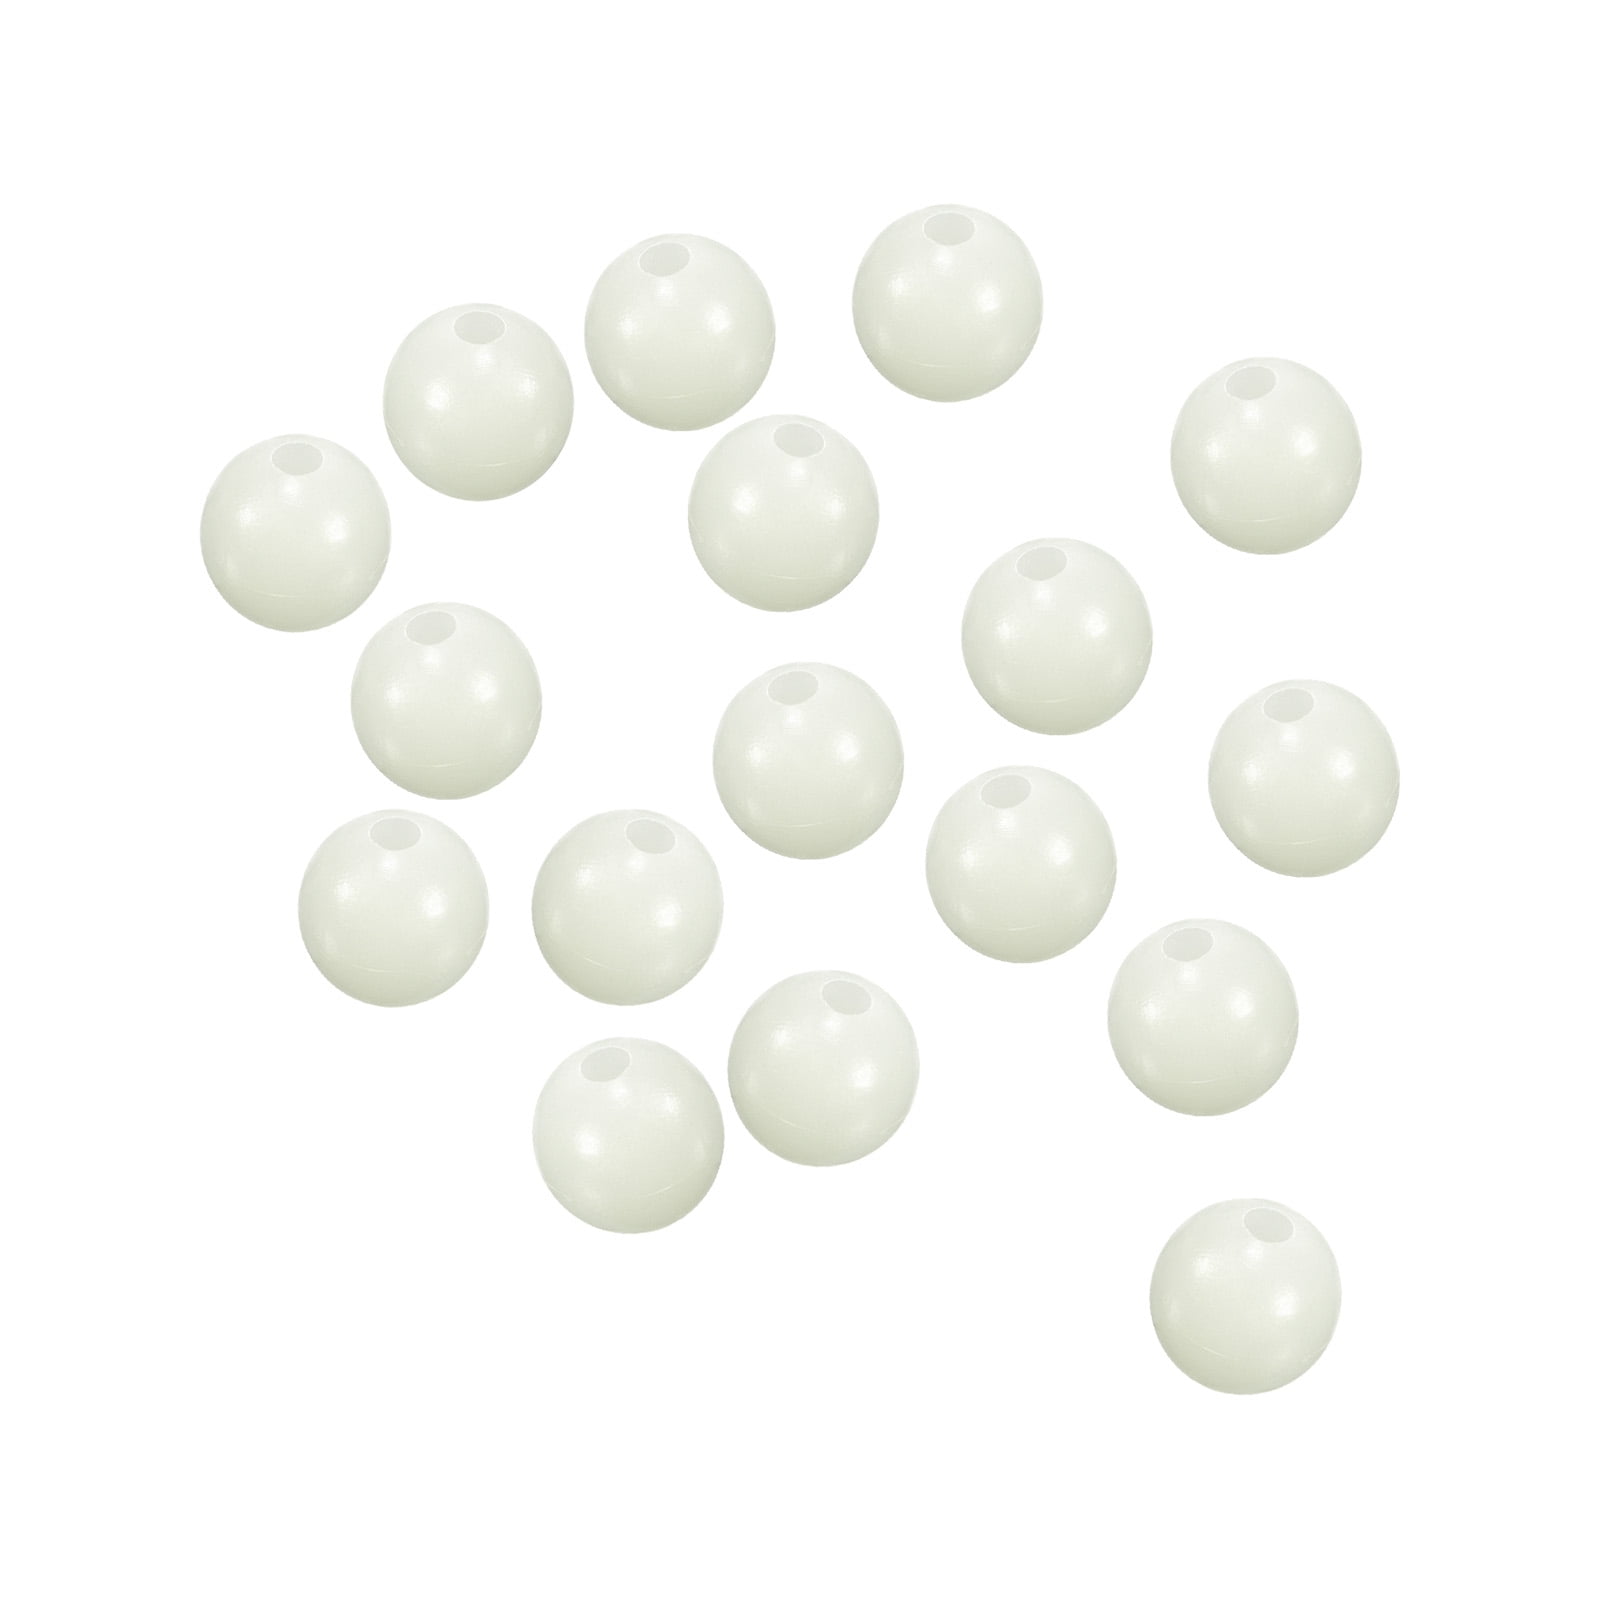 Uxcell 12mm Round Soft Plastic Luminous Glow Fishing Beads Tackle Tool White 200 Pieces, Size: 12 mm